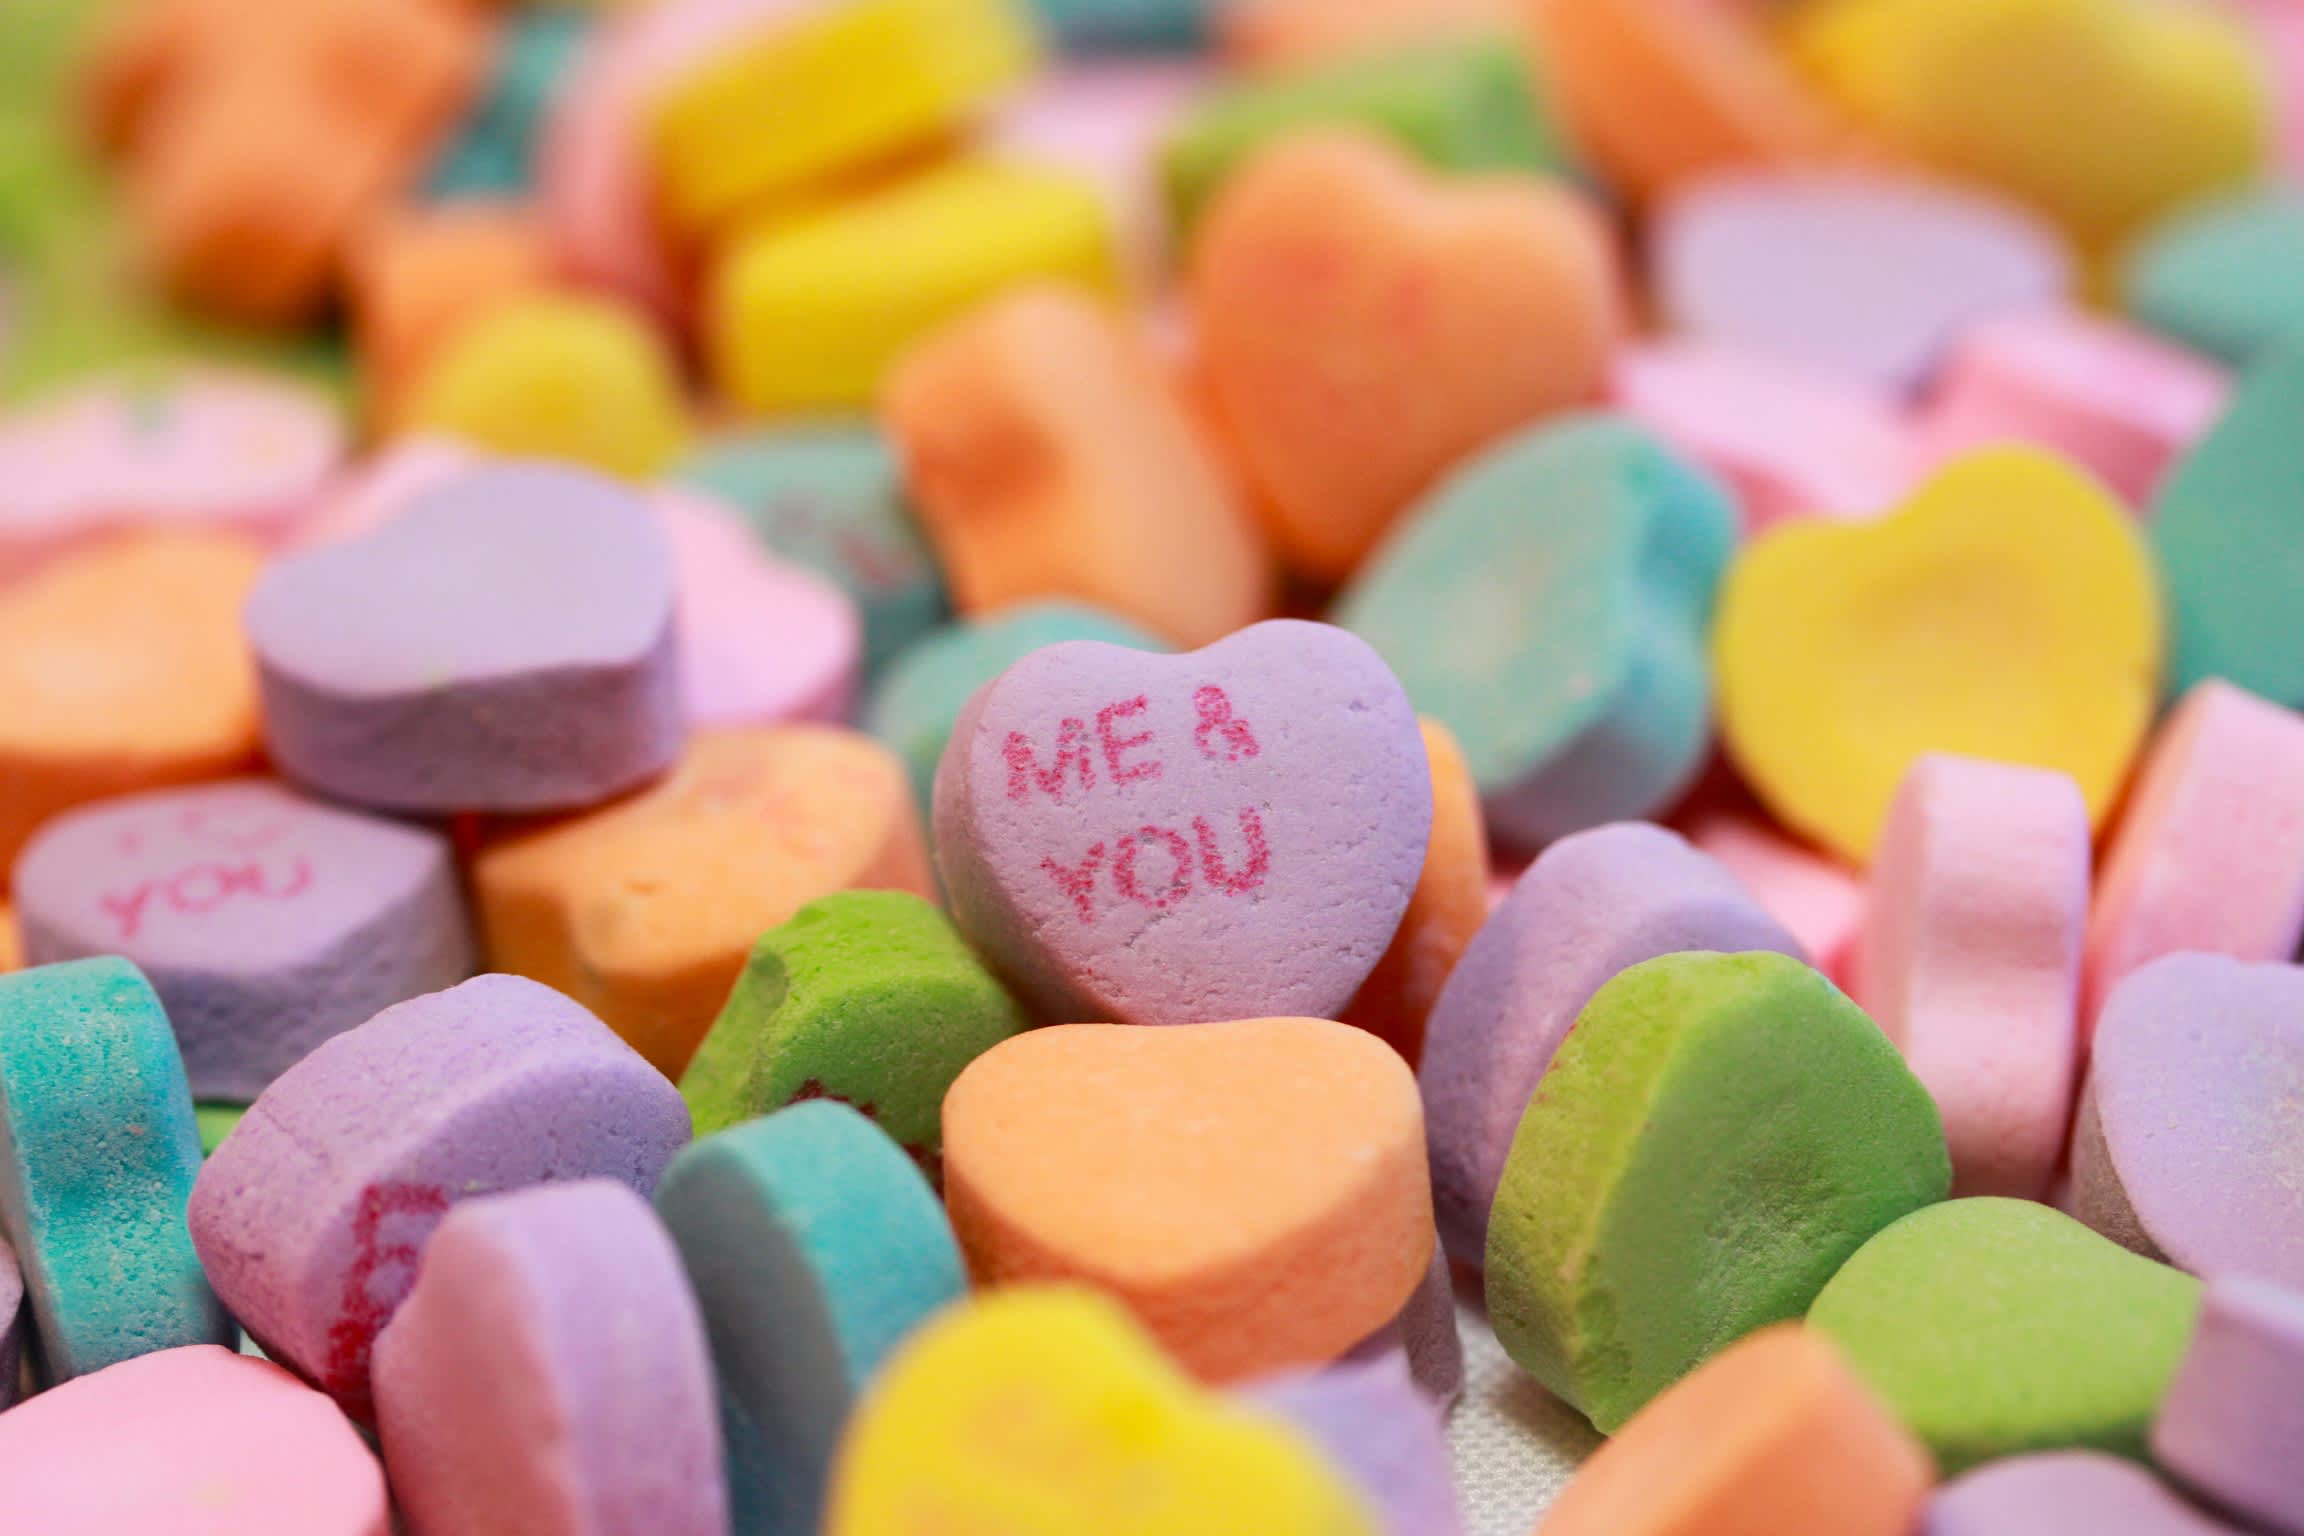 America's favorite Valentine's Day candy is unavailable this year